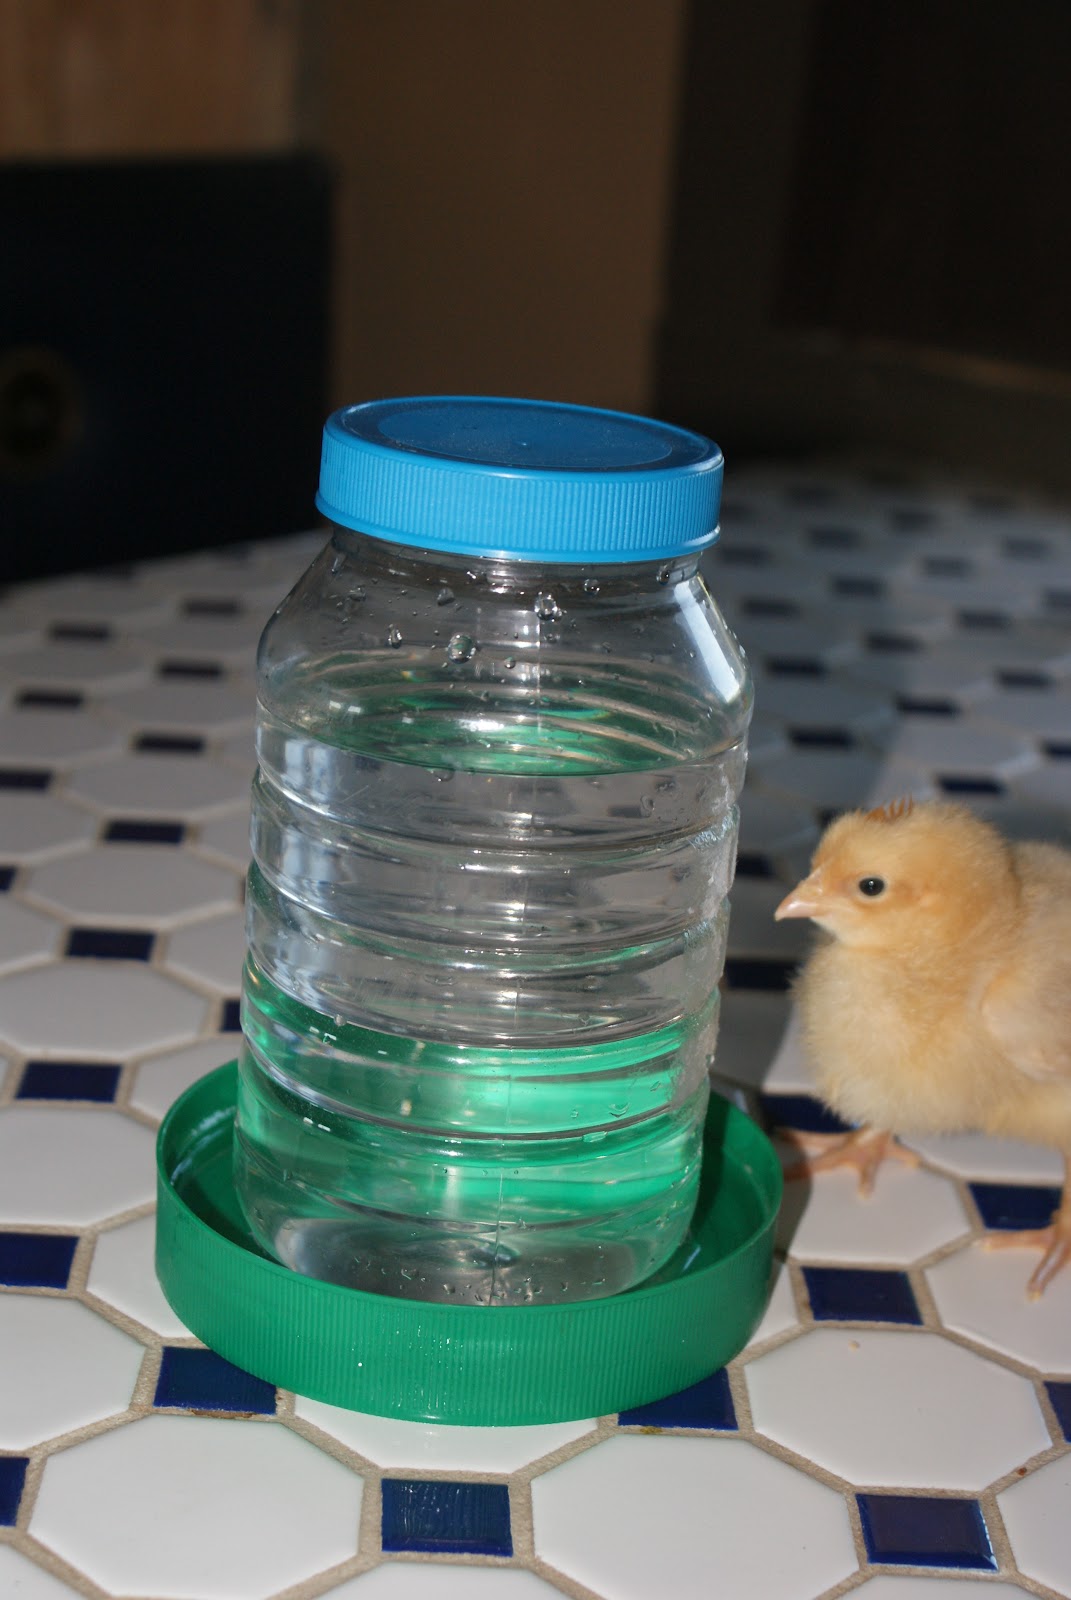 off-the-grid-at-30-frugal-tuesday-a-quick-diy-chick-feeder-waterer